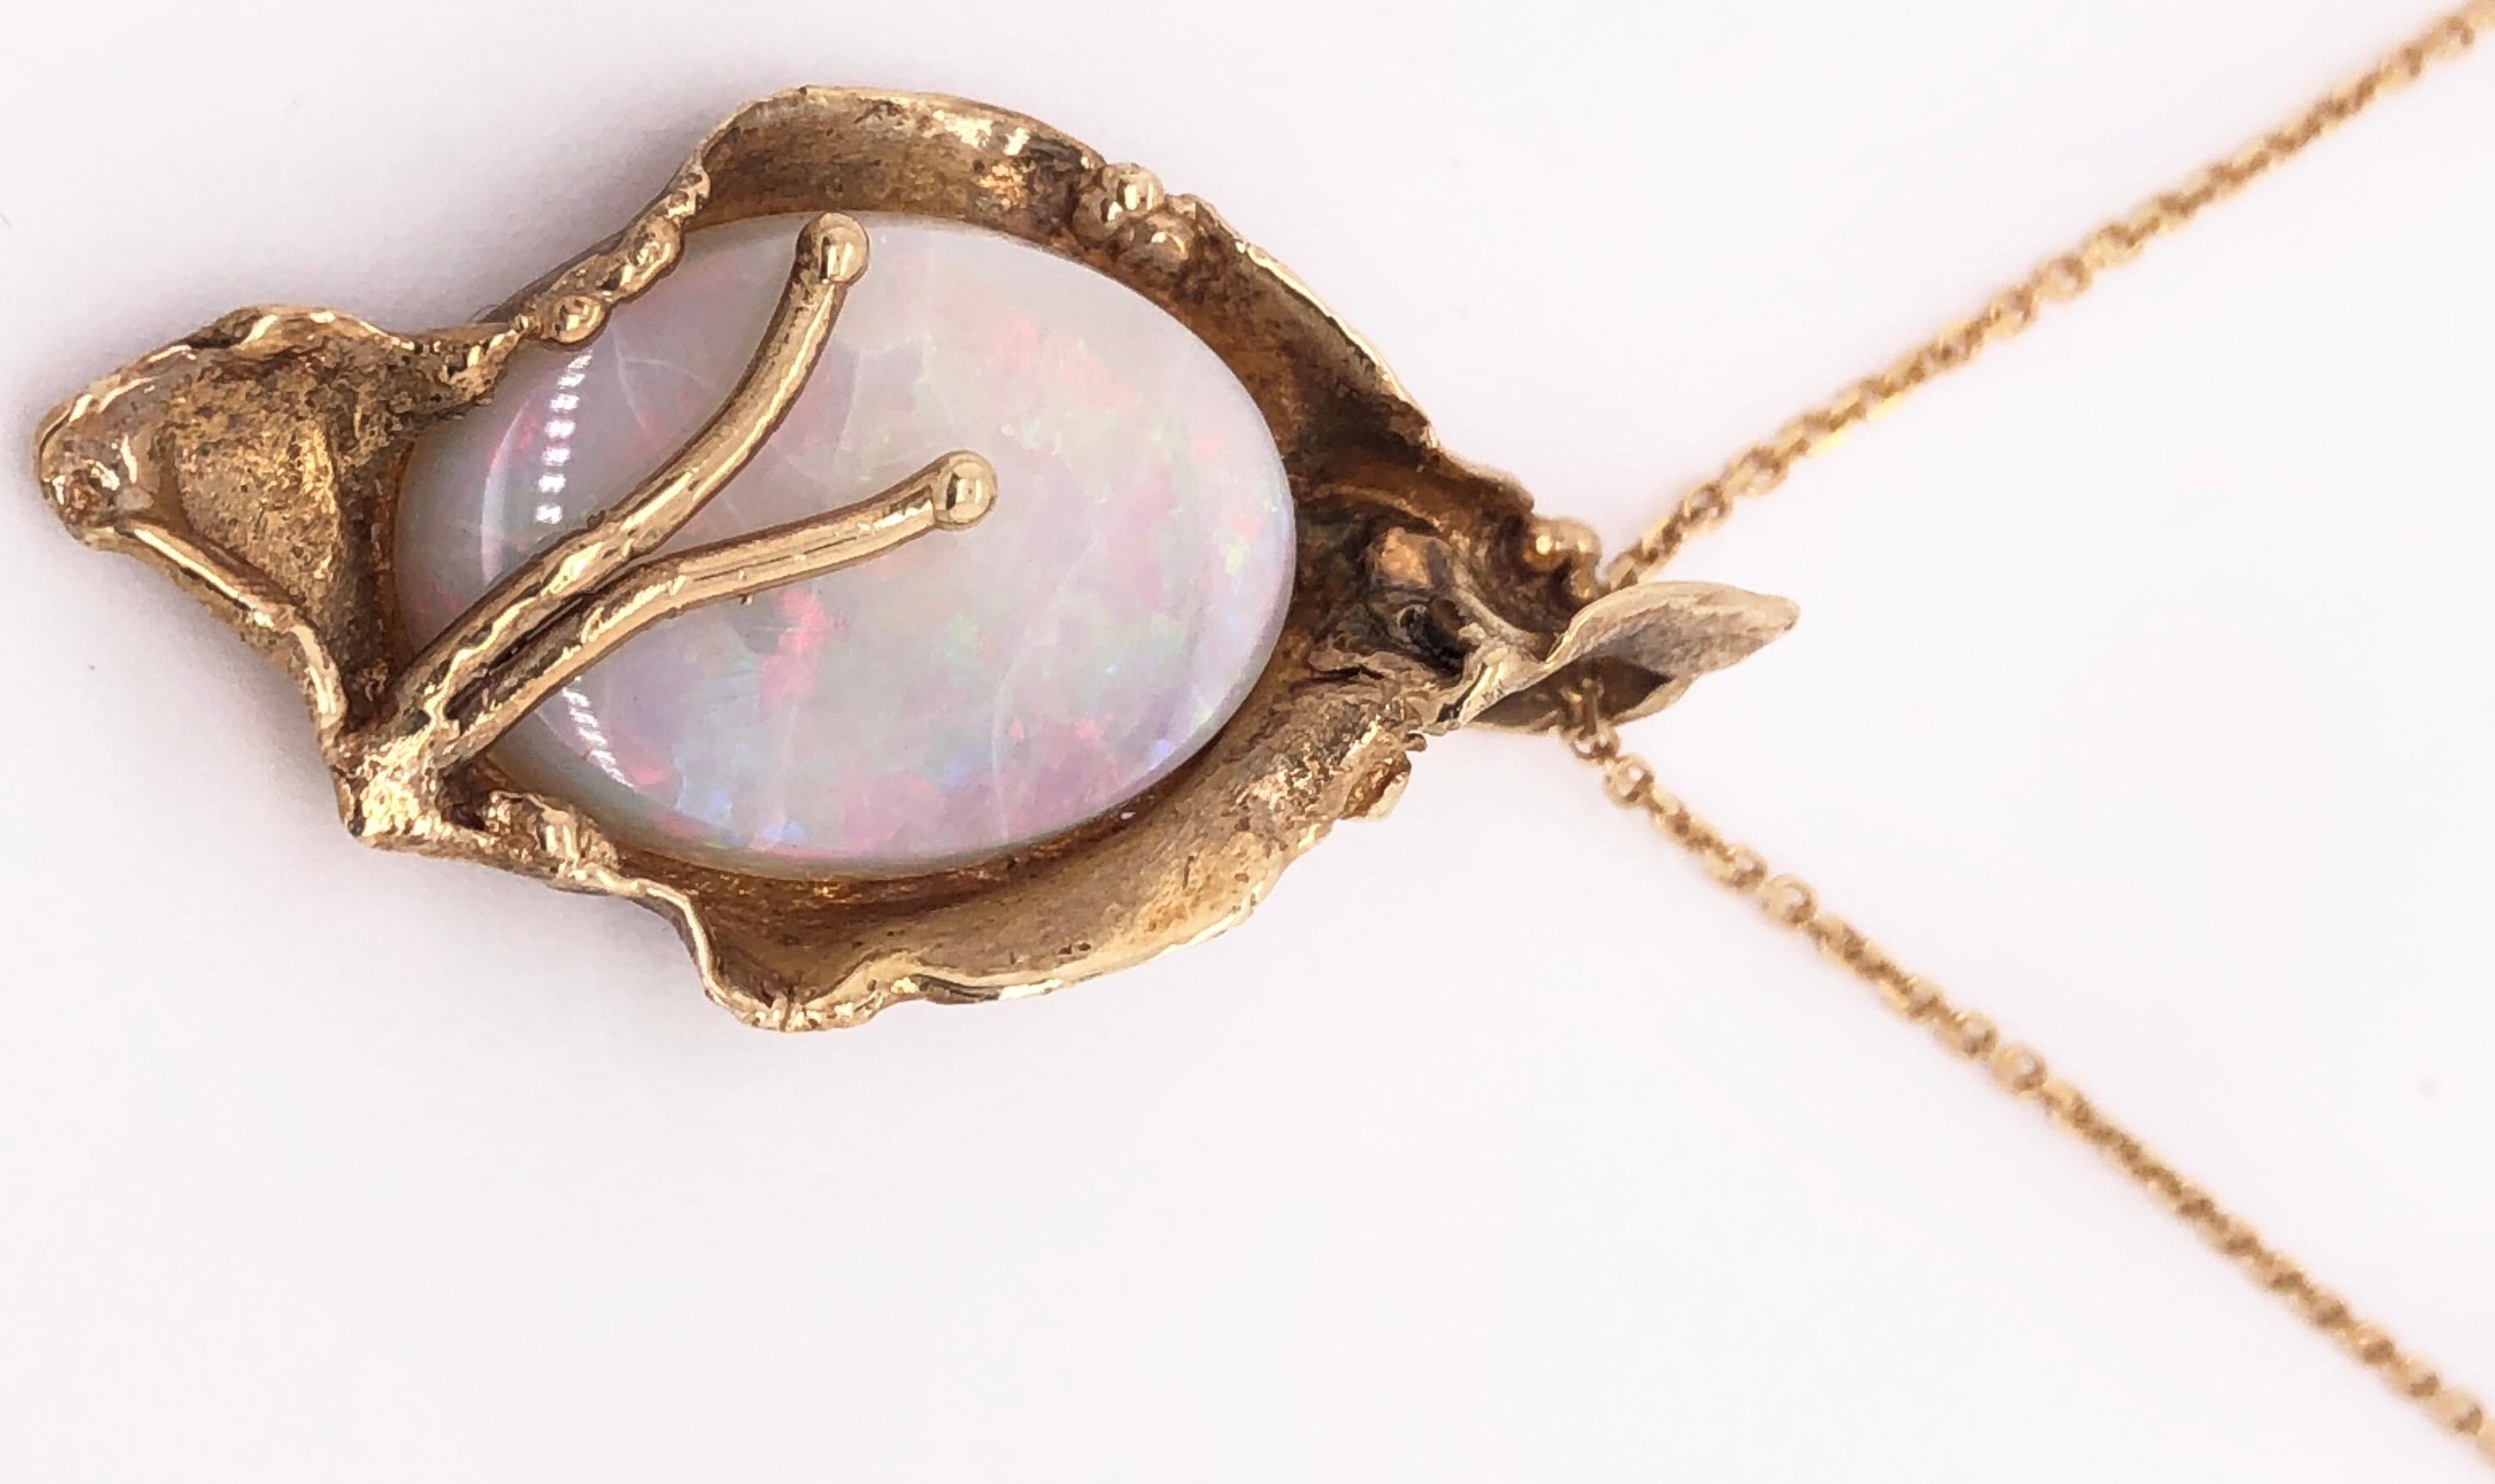 14 Karat Yellow Gold Necklace with Freeform Oval Opal and Gold Pendant In Good Condition For Sale In Stamford, CT